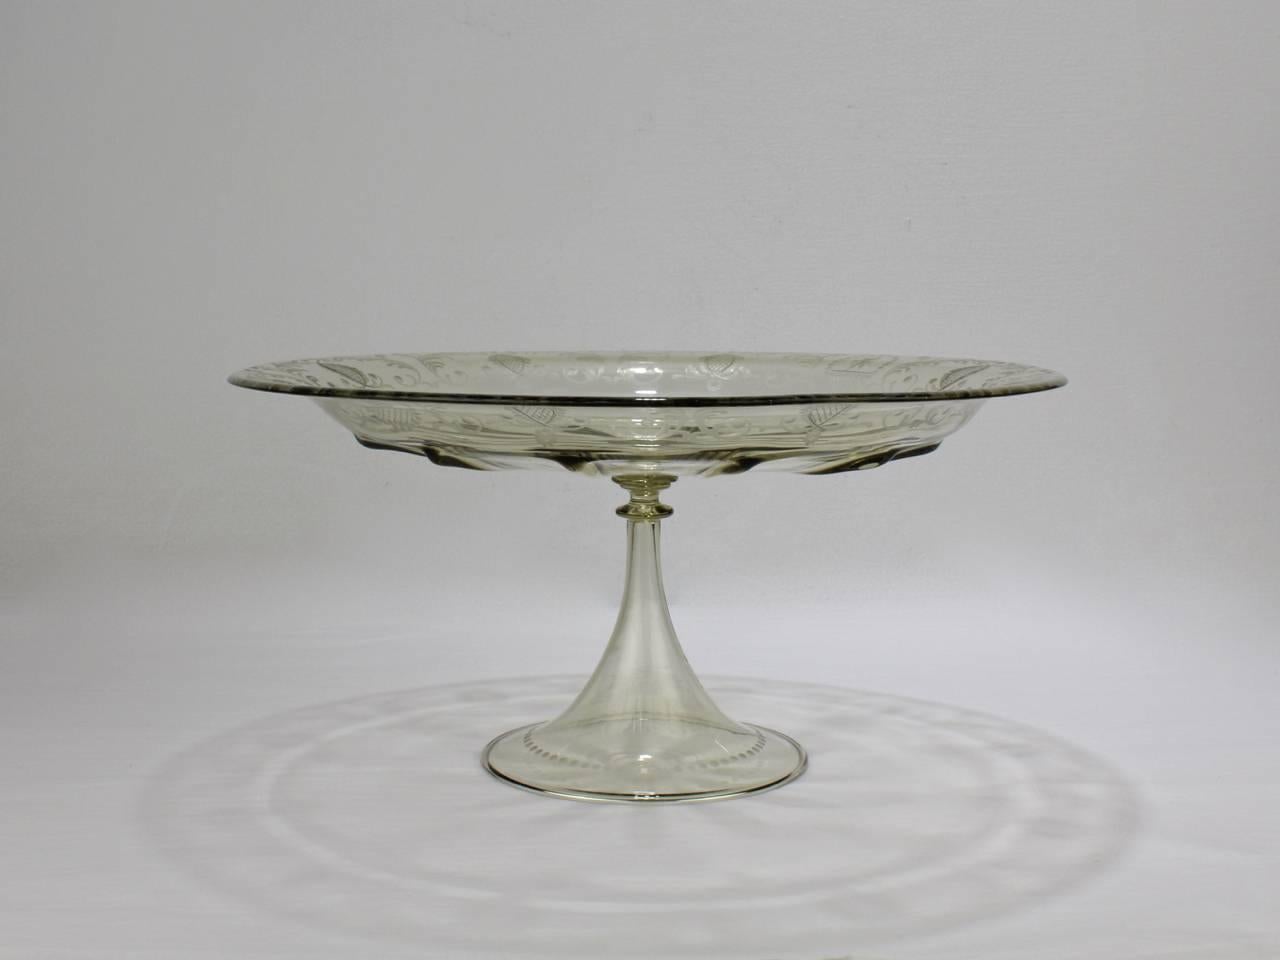 A good vintage Venetian glass tazza or cake stand.

Well-scaled as a table centerpiece.

Manufactured by Pauly and Co. of Venice, Italy in a light amber blown glass with a broad rim with Renaissance style etching resting on a trumpet-form